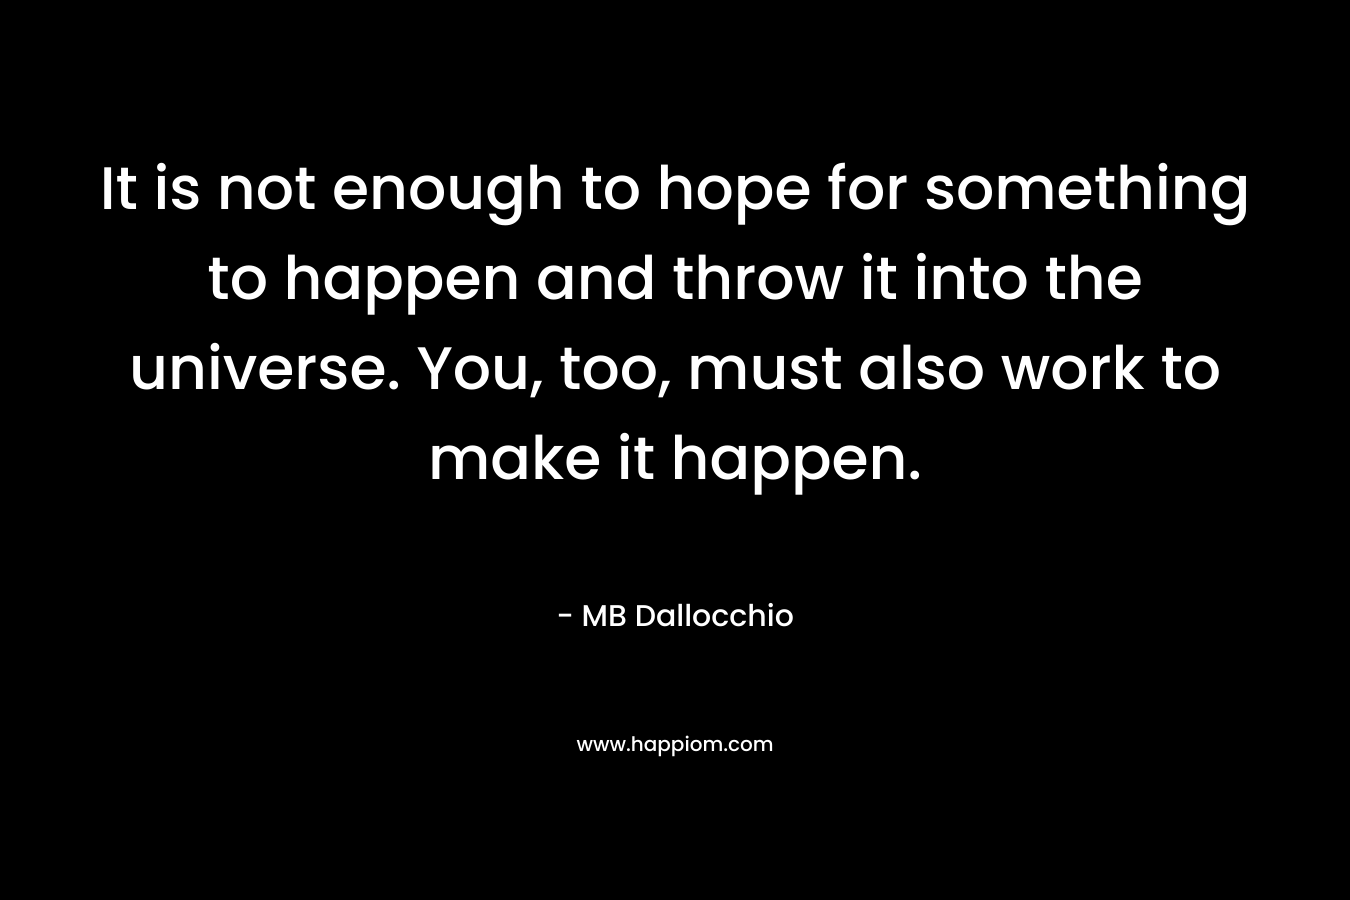 It is not enough to hope for something to happen and throw it into the universe. You, too, must also work to make it happen.